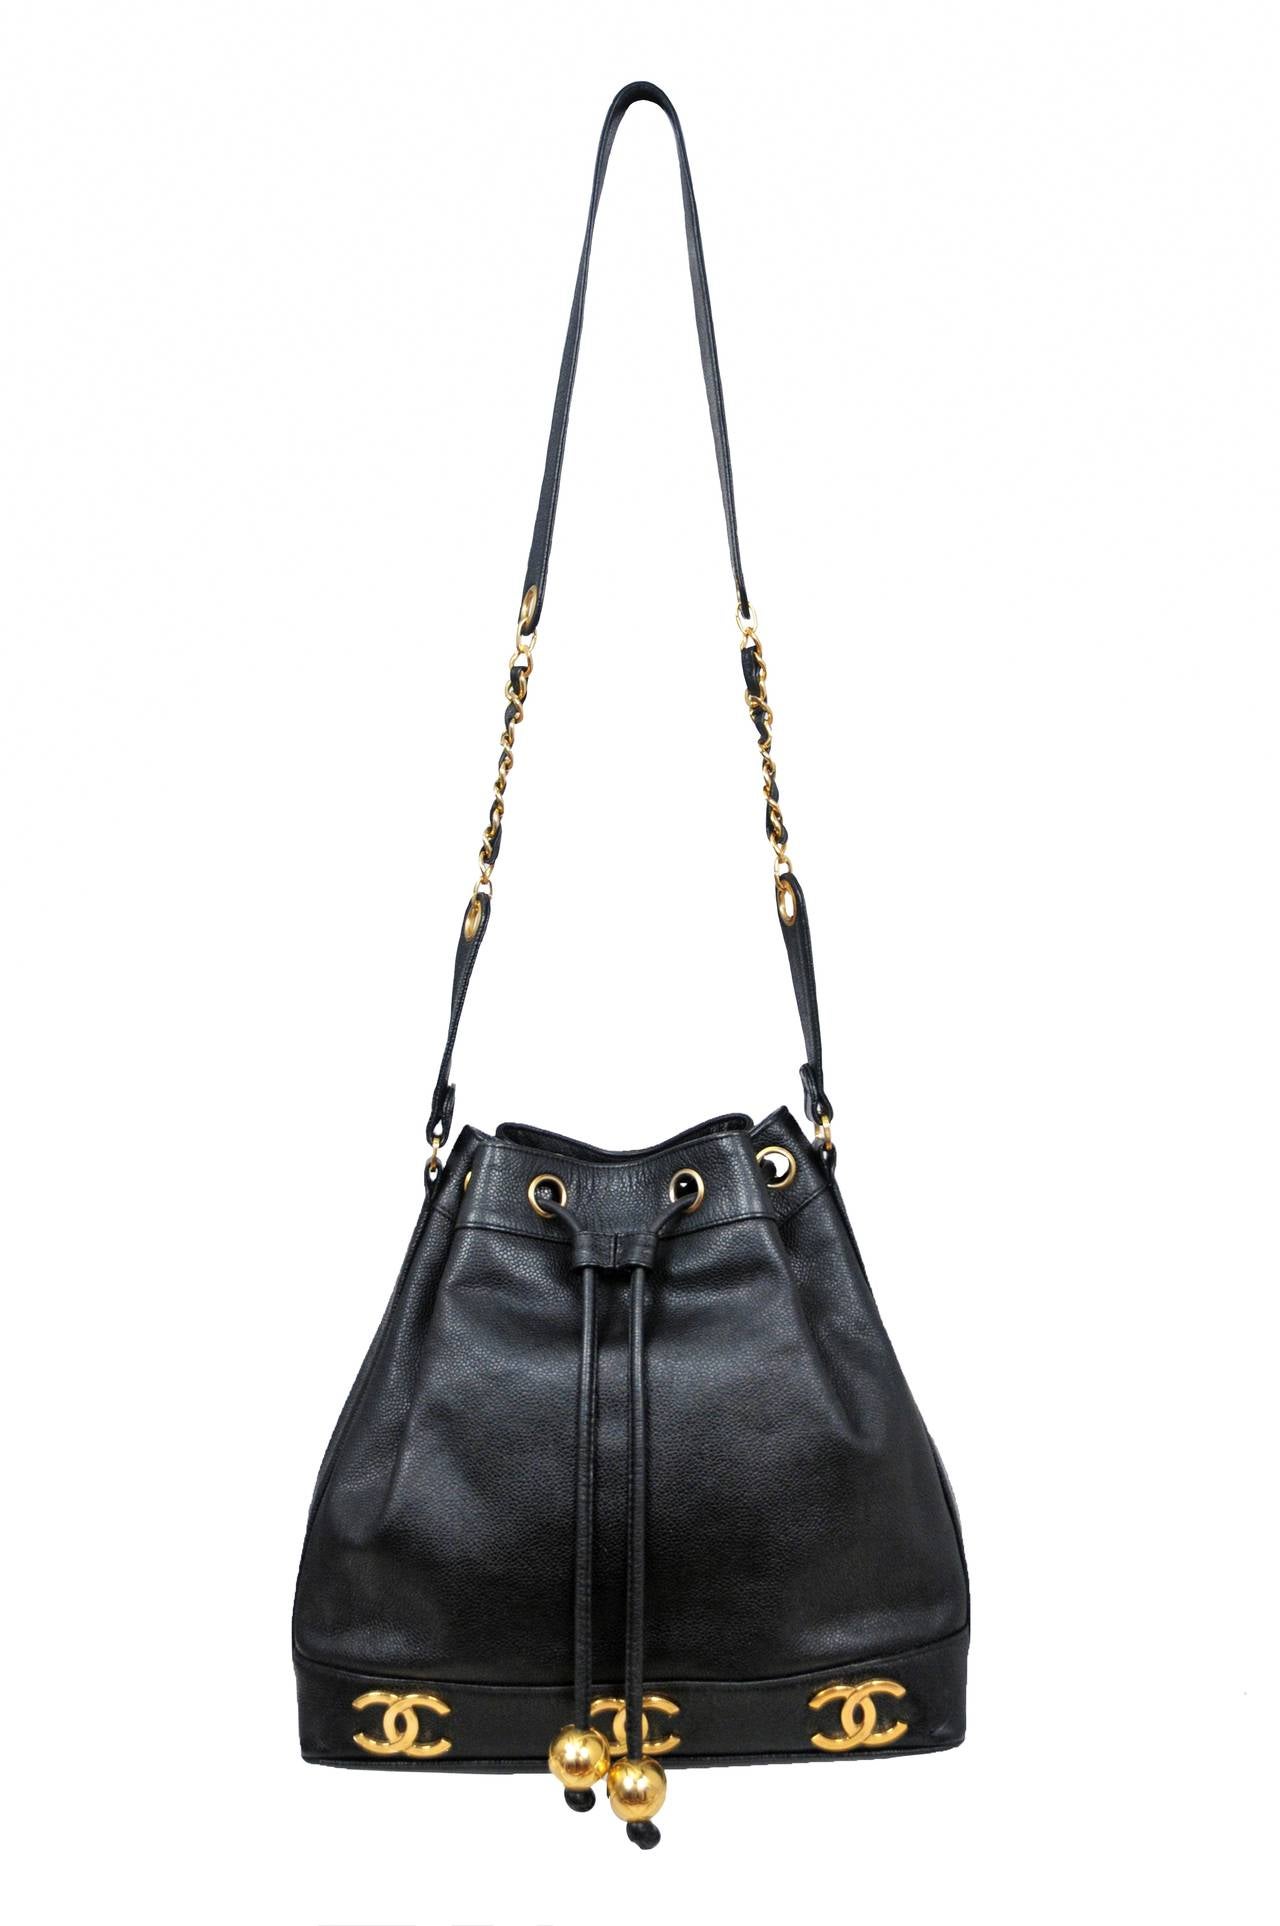 Vintage Chanel caviar black leather bucket bag with gold CC logo's surrounding the base. Drawstring closure embellished with gold globe hardware.

Strap length 21